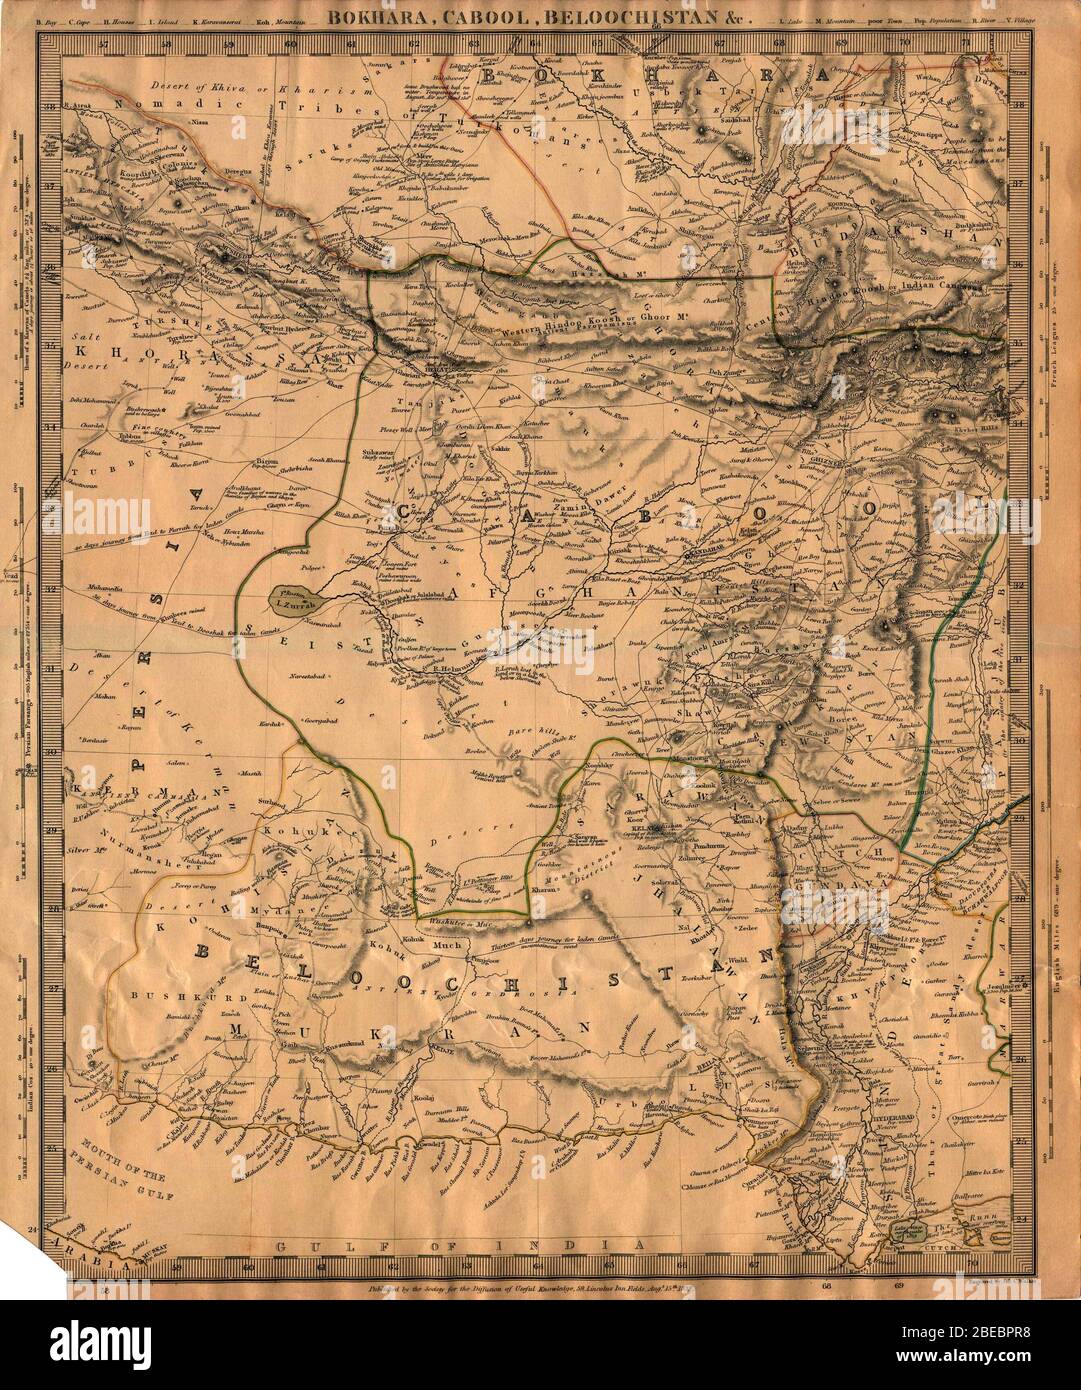 'English: Bokhara Cabool Beloochistan, Published by the Society for the Diffusion of Useful Knowledge, 1838. From the Perry-Castañeda Library Map Collection, University of Texas at Austin; Published 1838; http://www.lib.utexas.edu/maps/historical/bokhara 1838.jpg (LINK); Society for the Diffusion of Useful Knowledge; ' Stock Photo